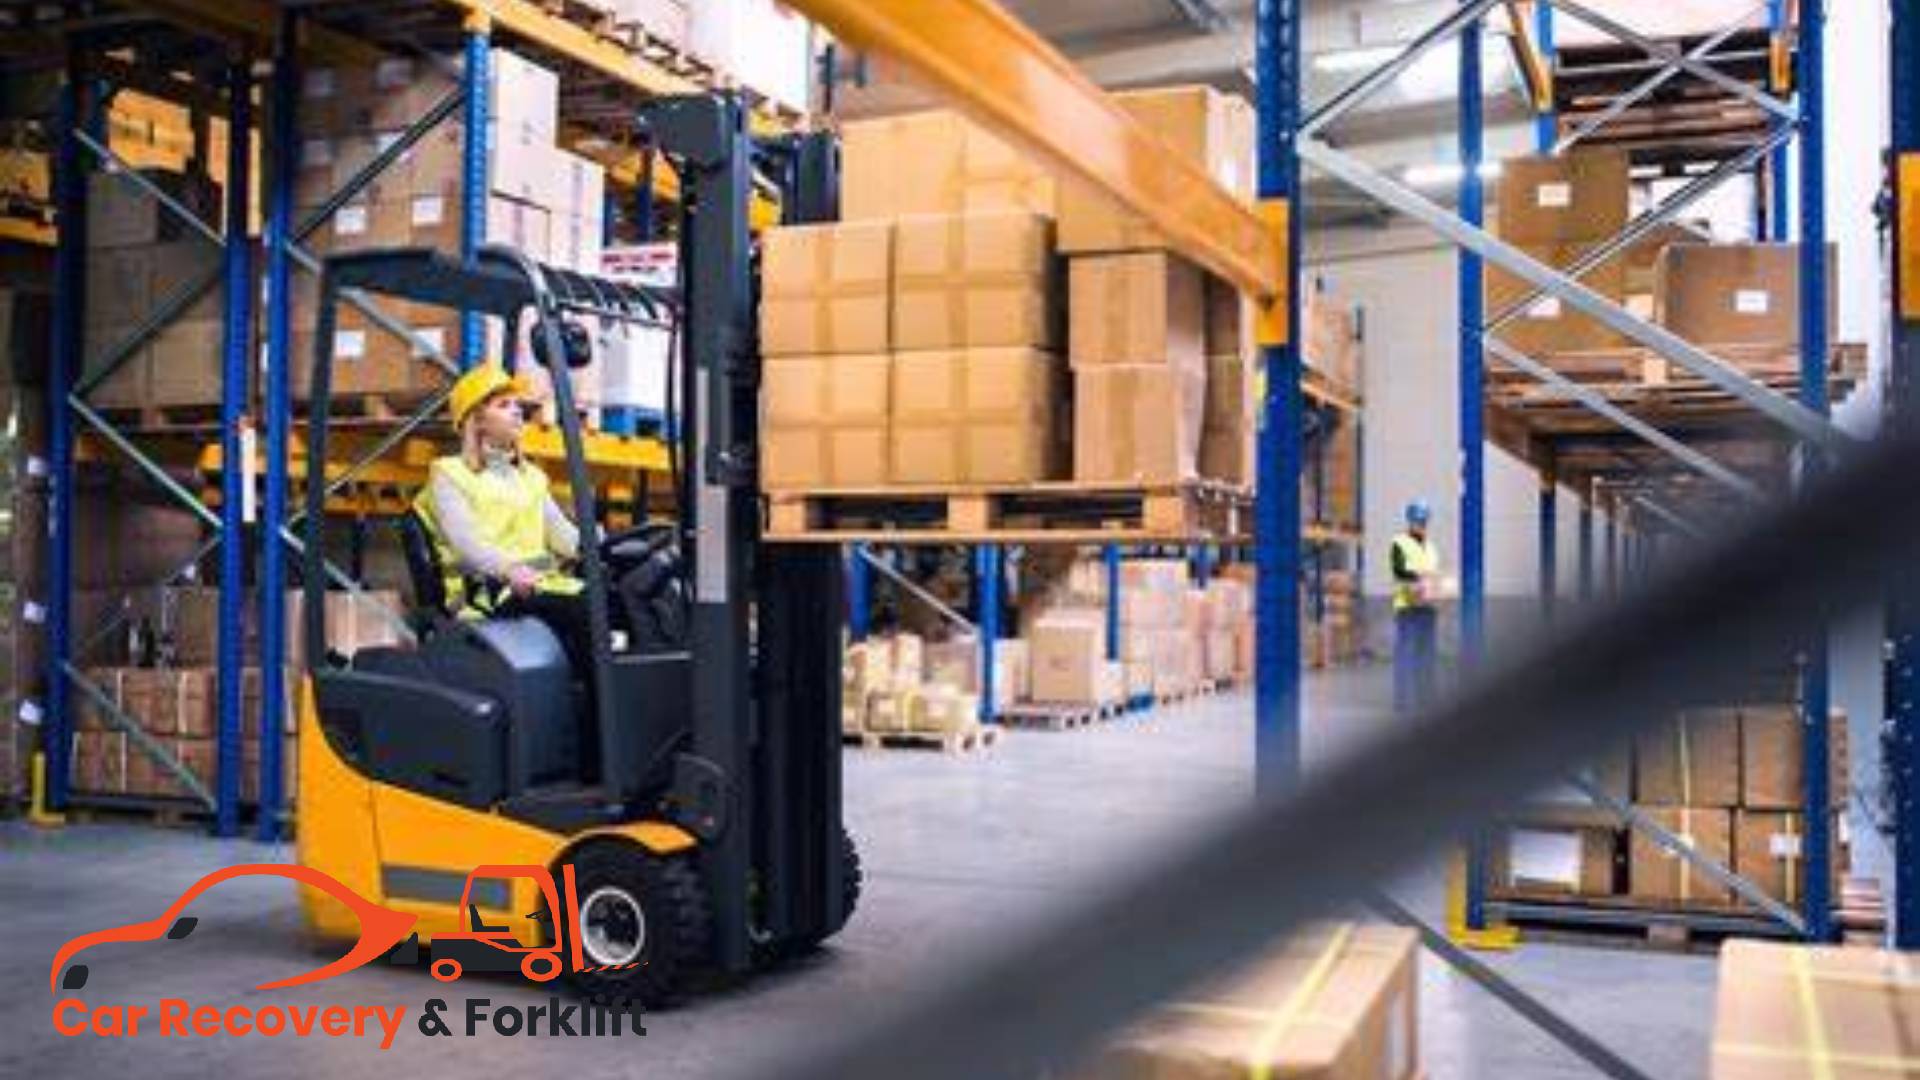 How much is a forklift operator's salary in Dubai